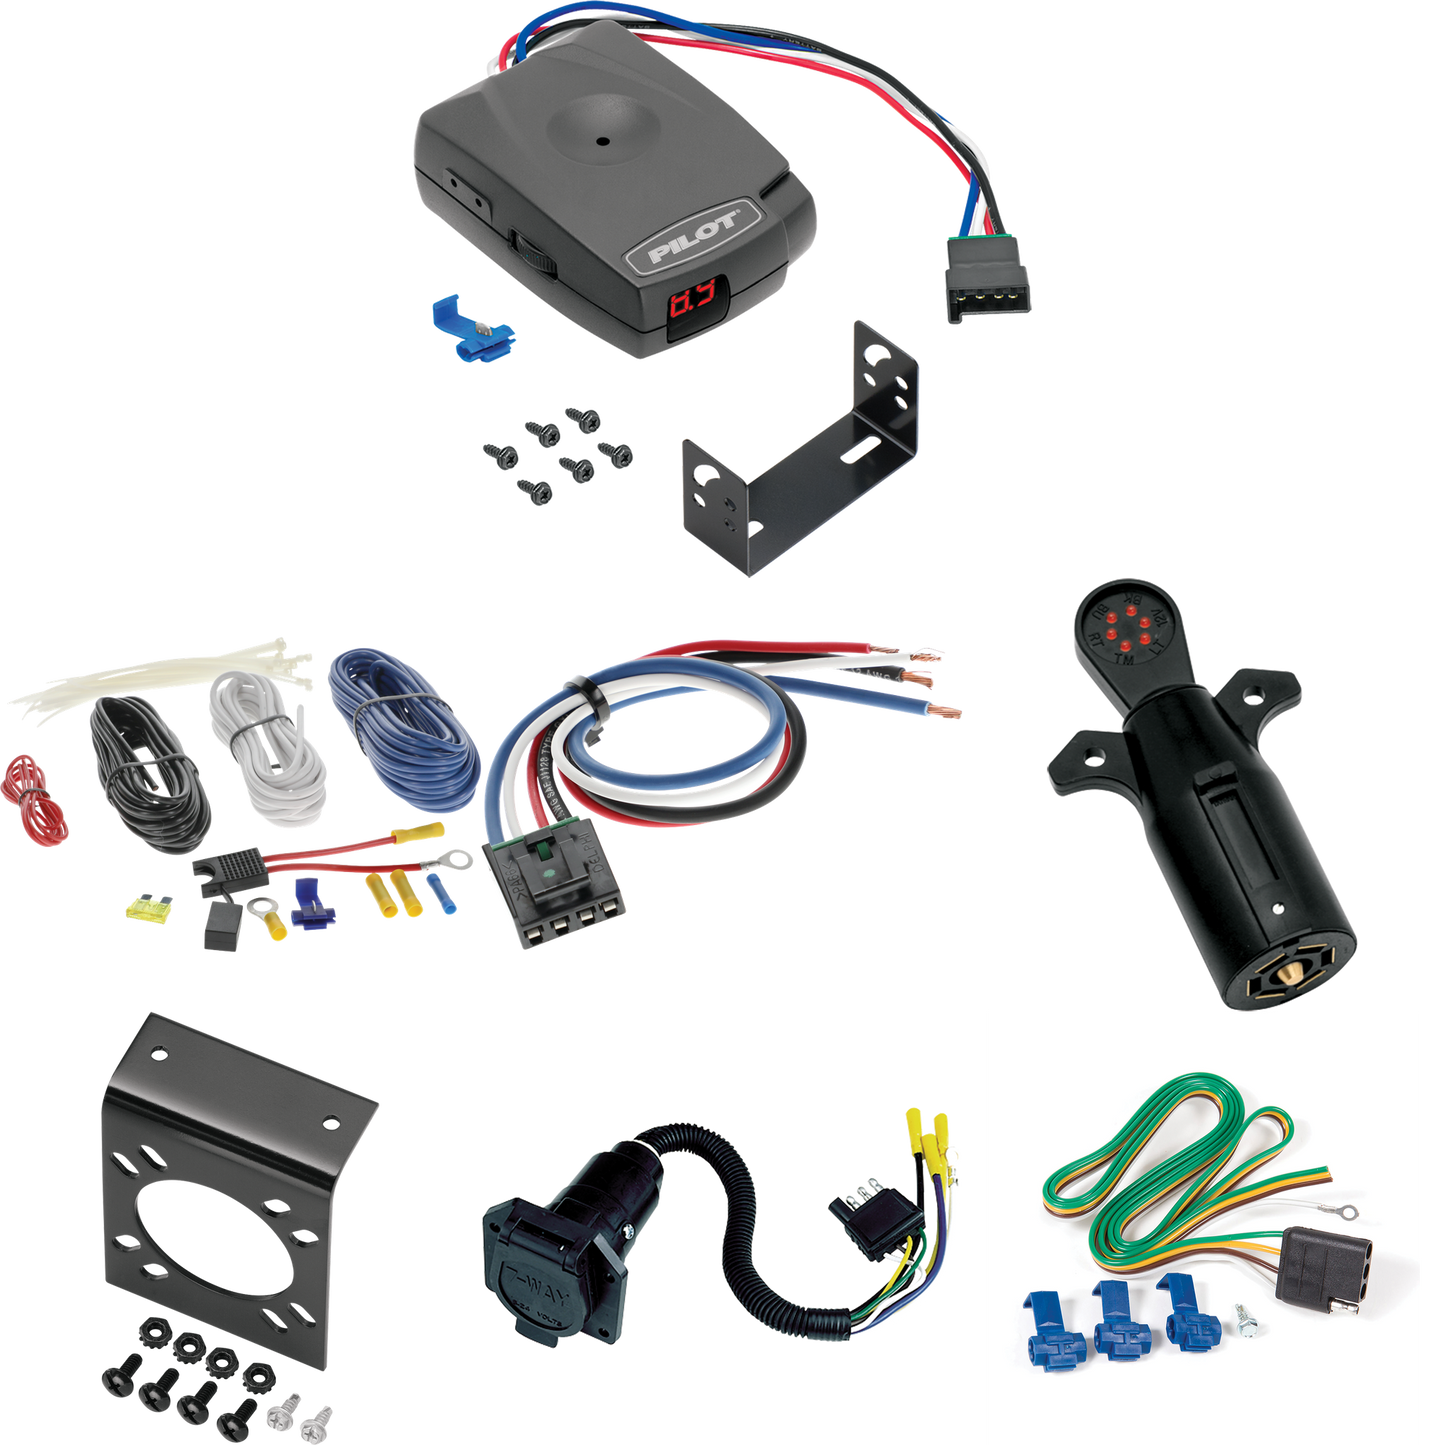 Fits 2022-2023 Ford F-150 7-Way RV Wiring + Pro Series Pilot Brake Control + Generic BC Wiring Adapter + 7-Way Tester By Reese Towpower